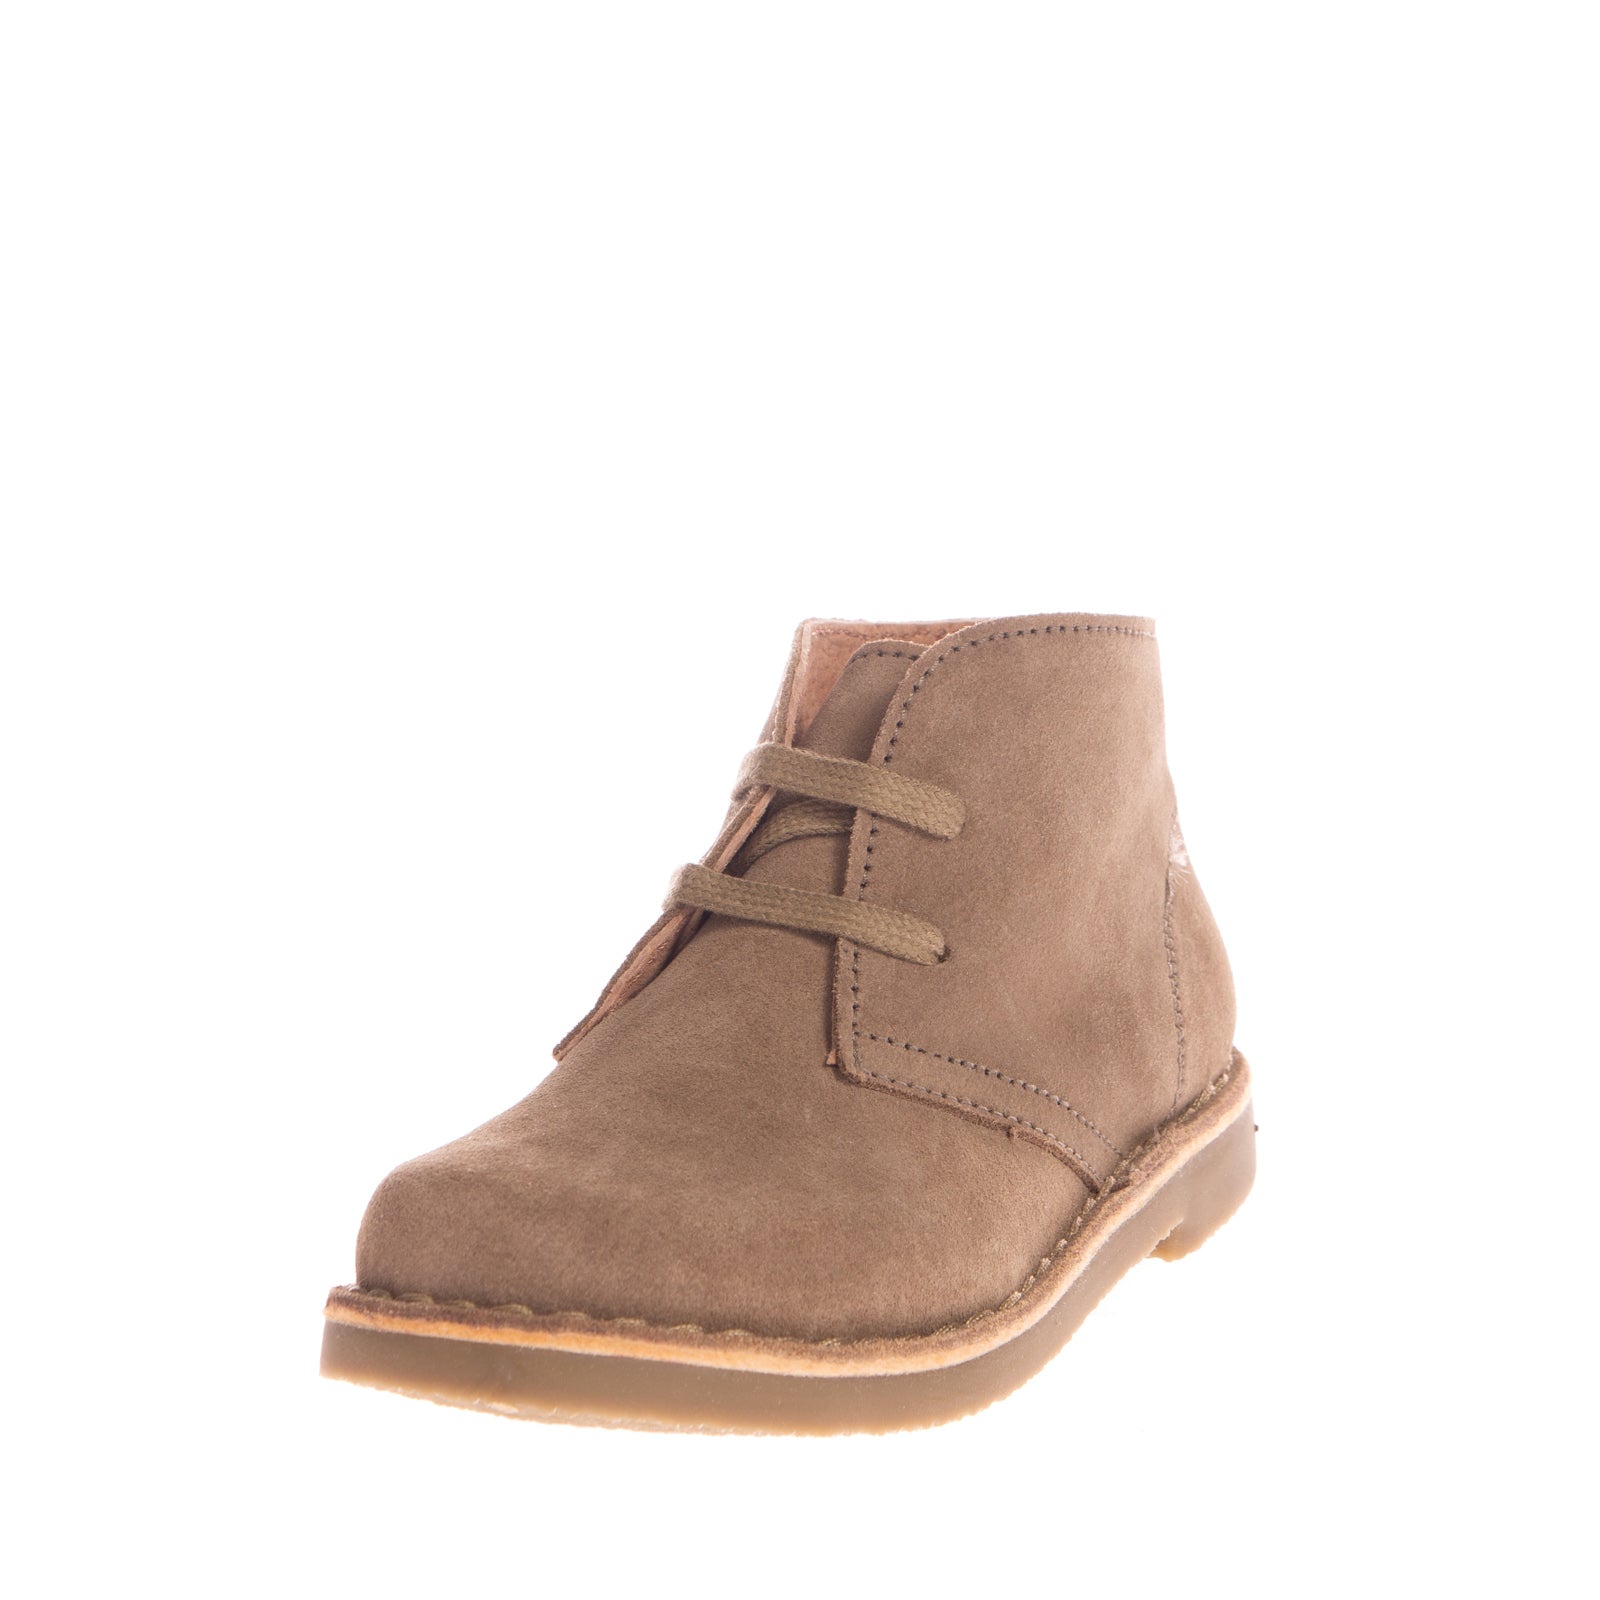 OCA-LOCA Suede Leather Chukka Boots Size 31 UK 12.5 US 13.5 Beige Lace Up gallery main photo